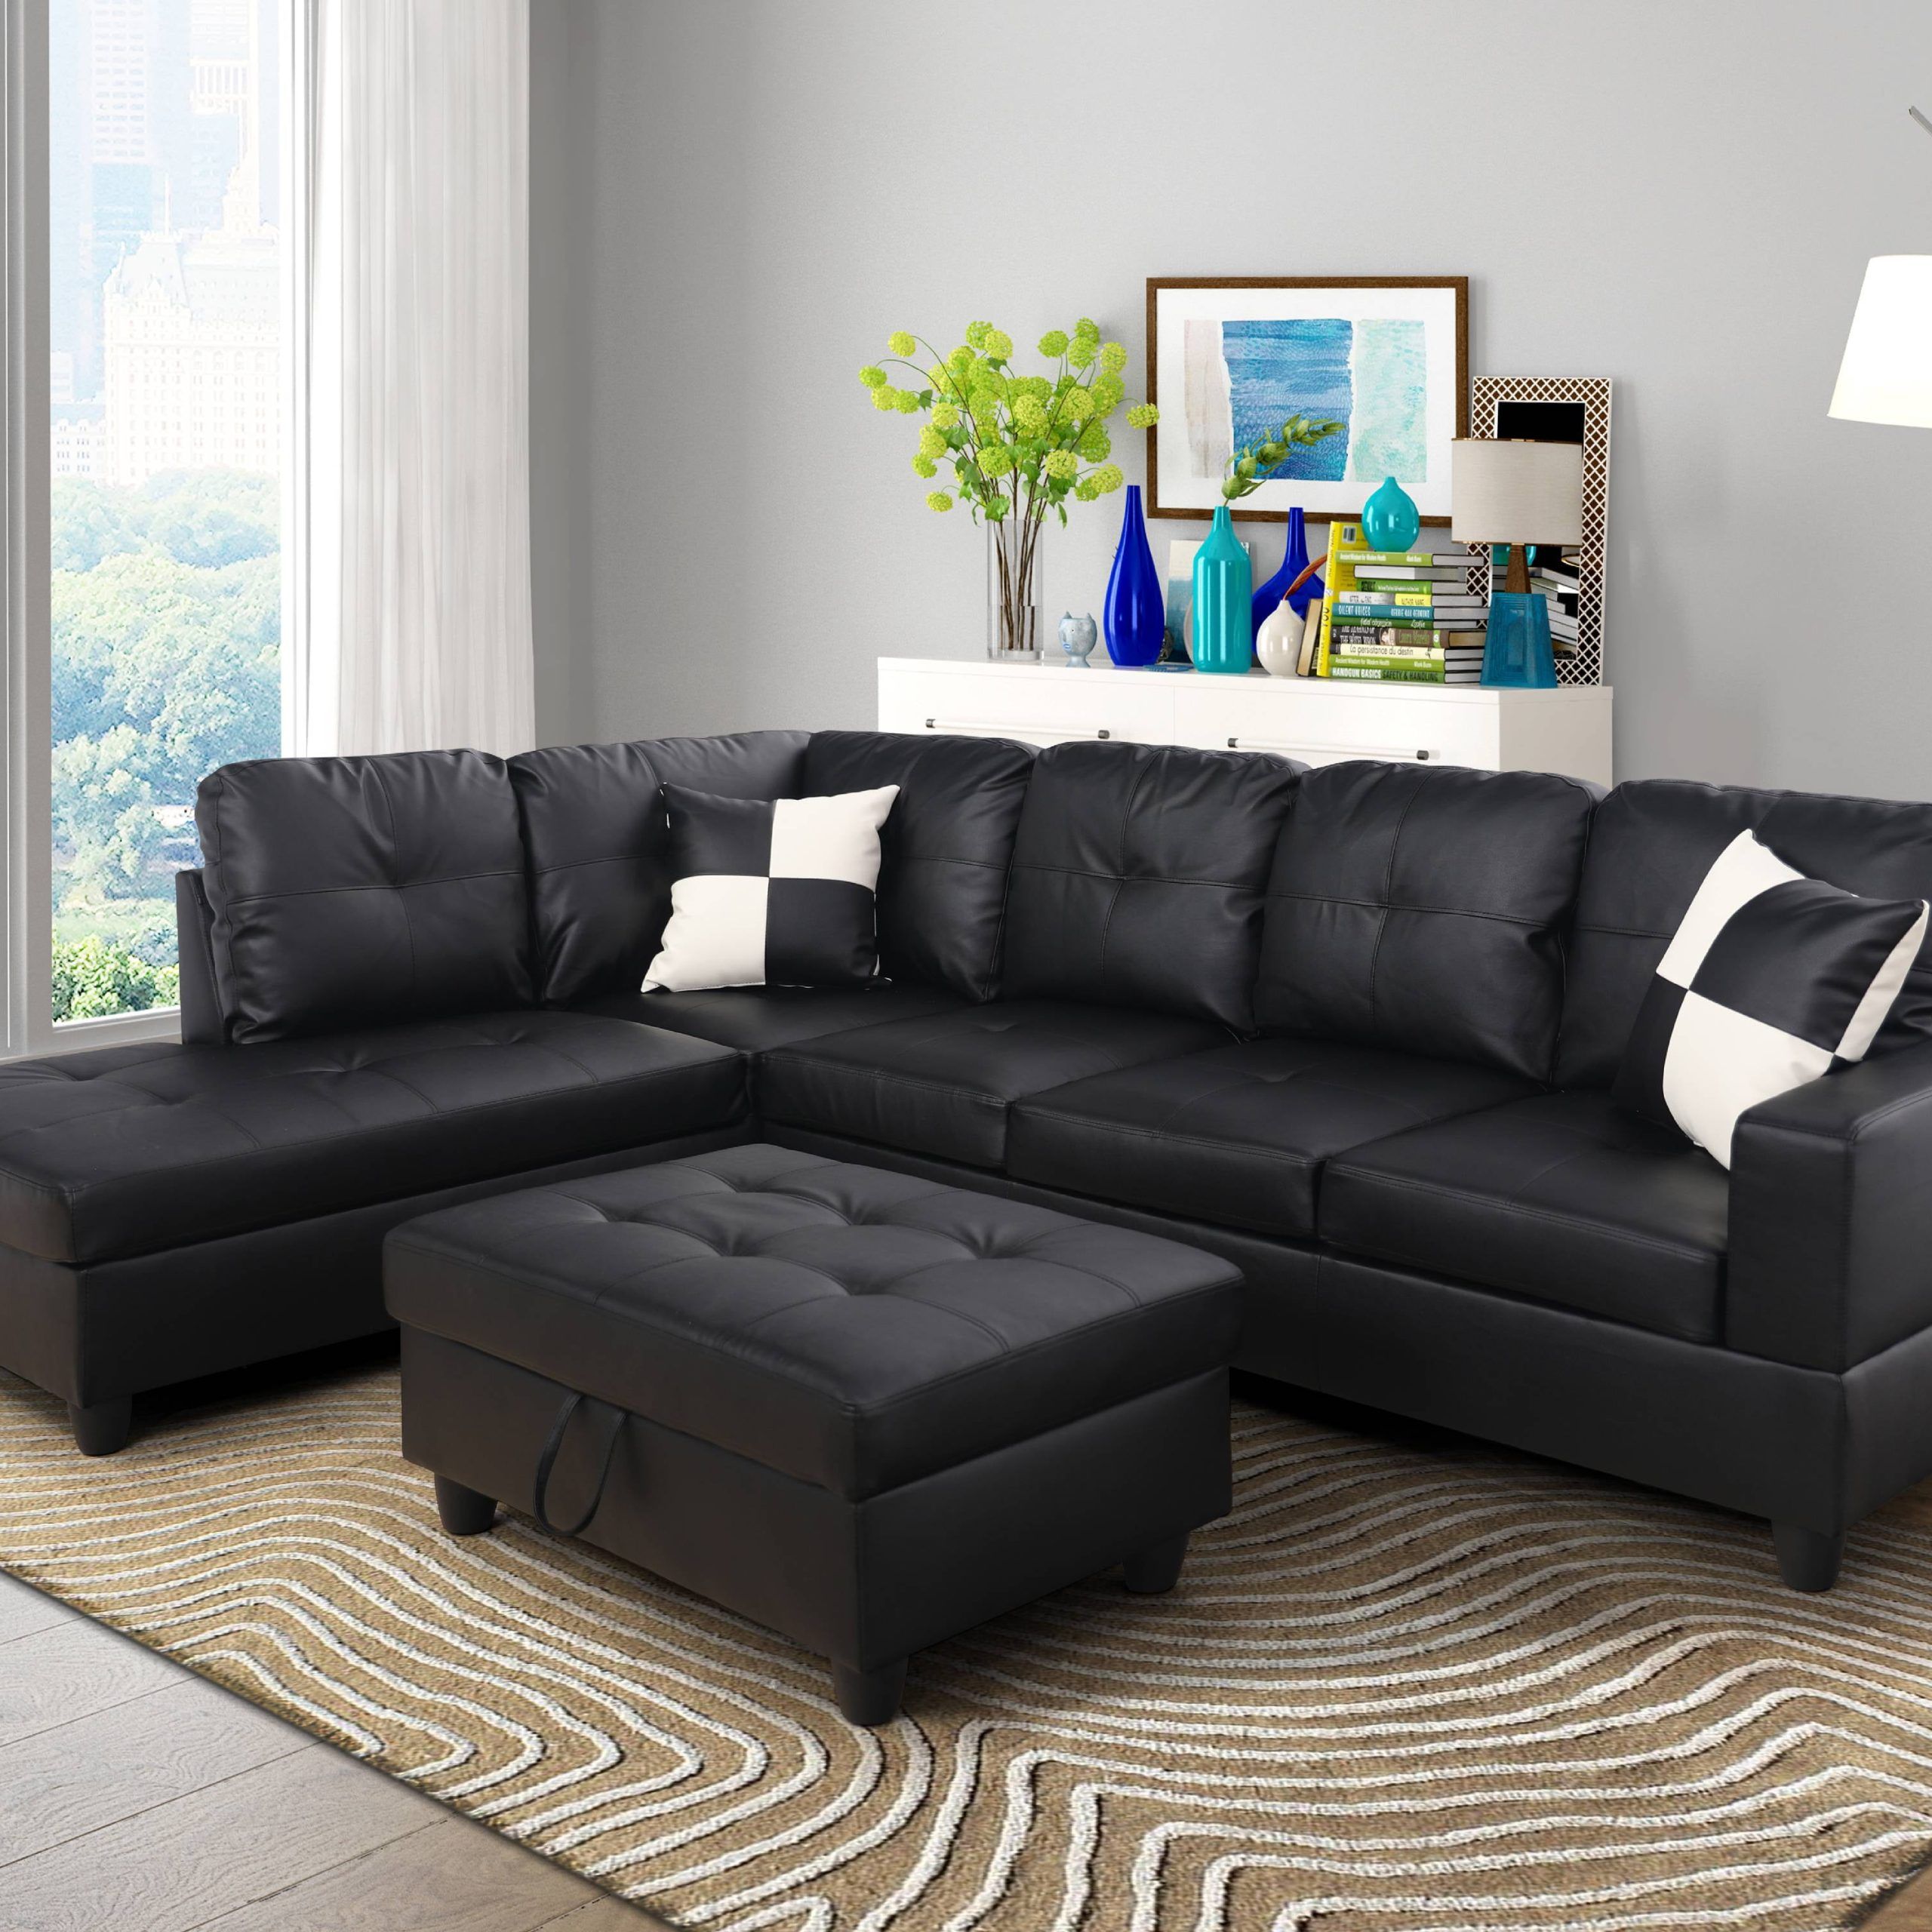 For U Furnishing Classic Black Faux Leather Sectional Sofa, Right Throughout Right Facing Black Sofas (Gallery 1 of 20)